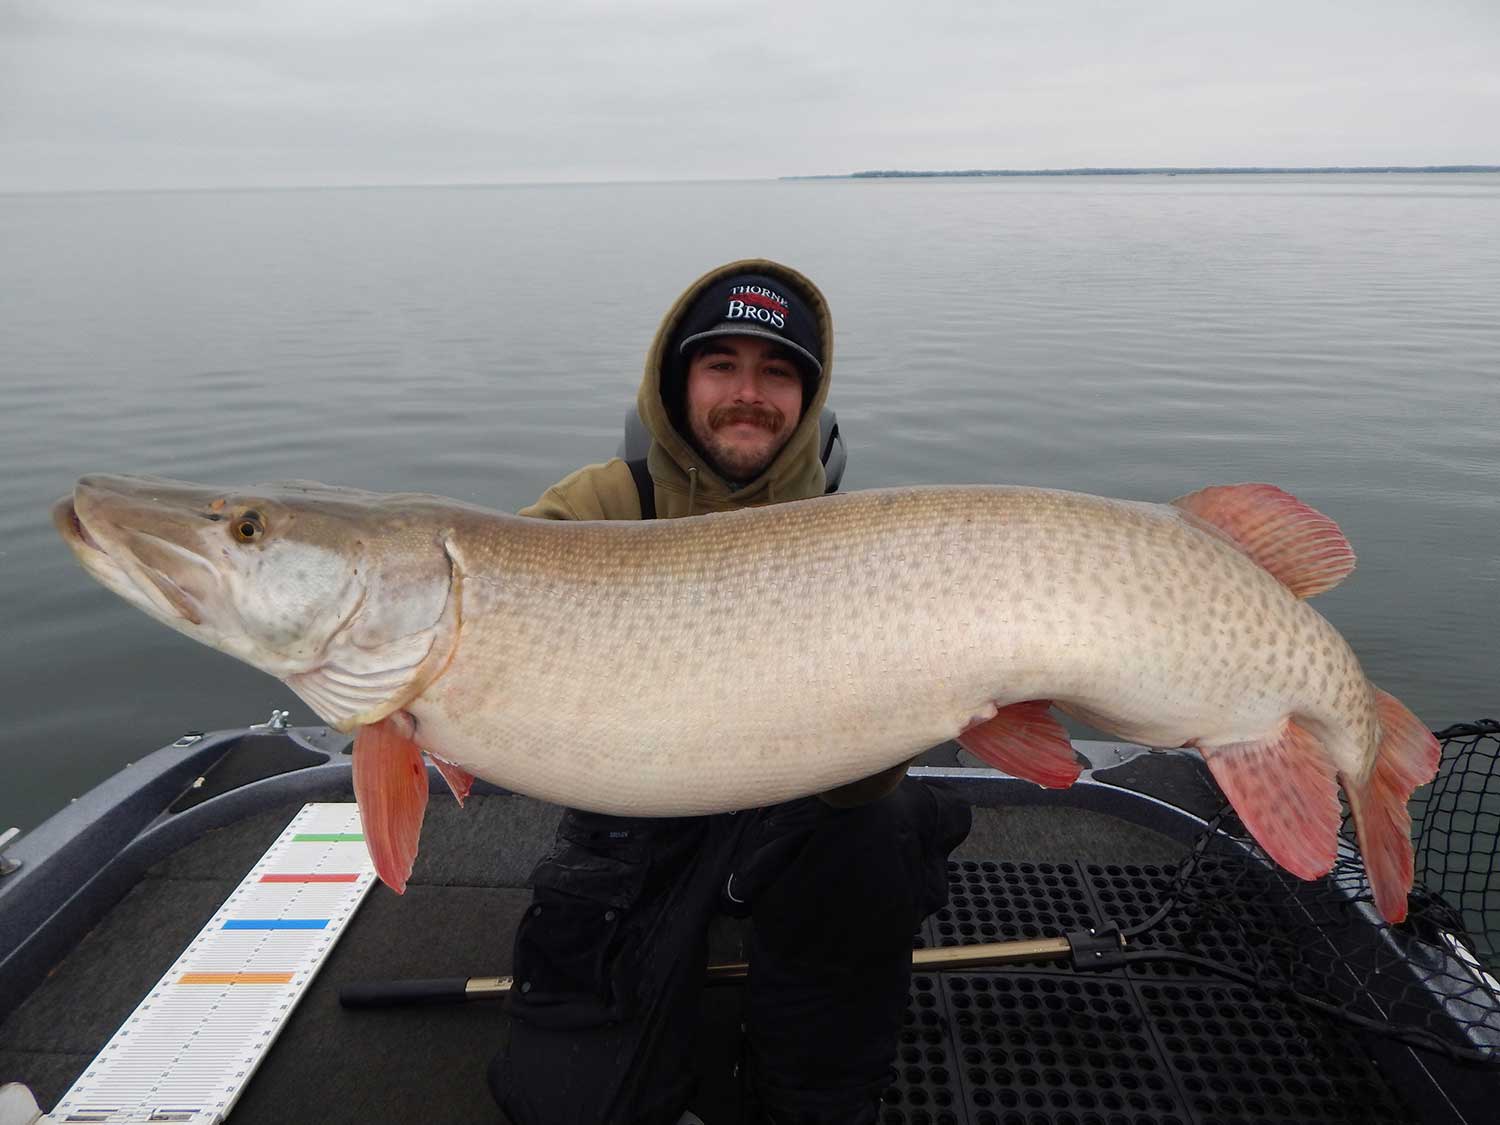 An angler holds up a large muskie fish.